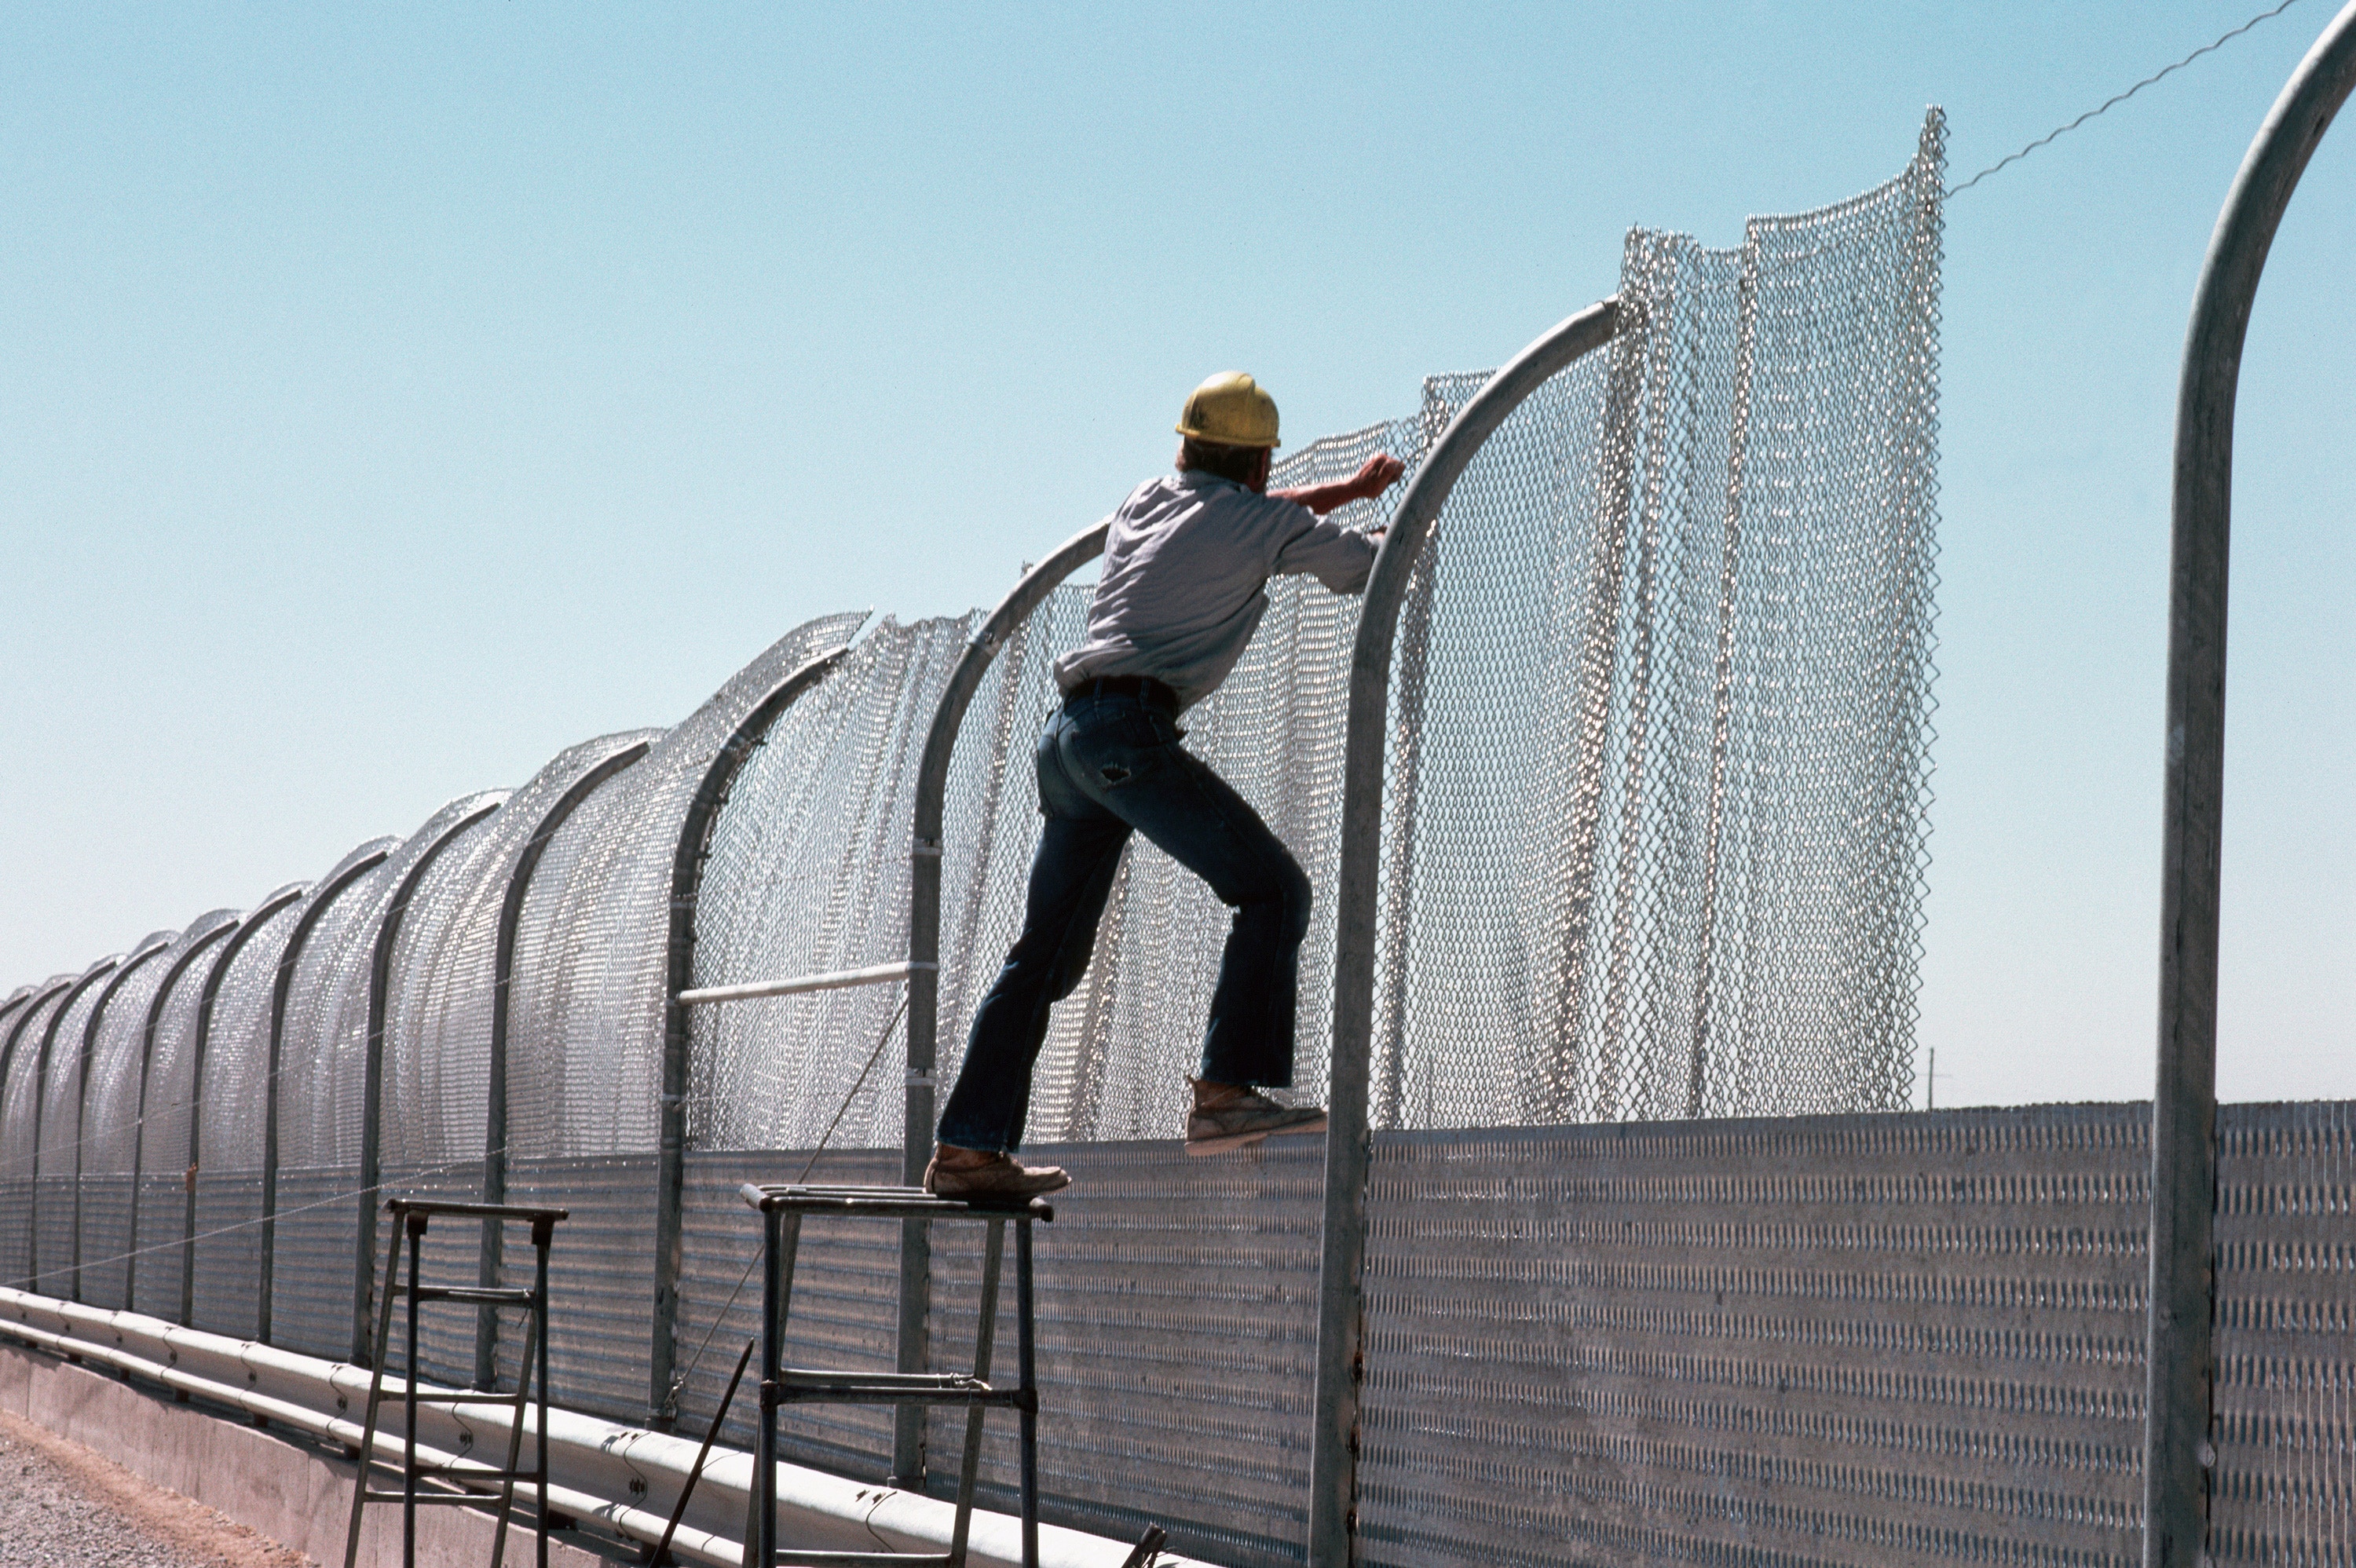 A construction worker pulls steel mesh into place on a section of the galvanized steel fence being built along the border between the United States and Mexico in 1979. The fence, intended to keep illegal aliens from crossing into the US, is known as the "Tortilla Curtain." (Photo by © Stephanie Maze/CORBIS/Corbis via Getty Images)